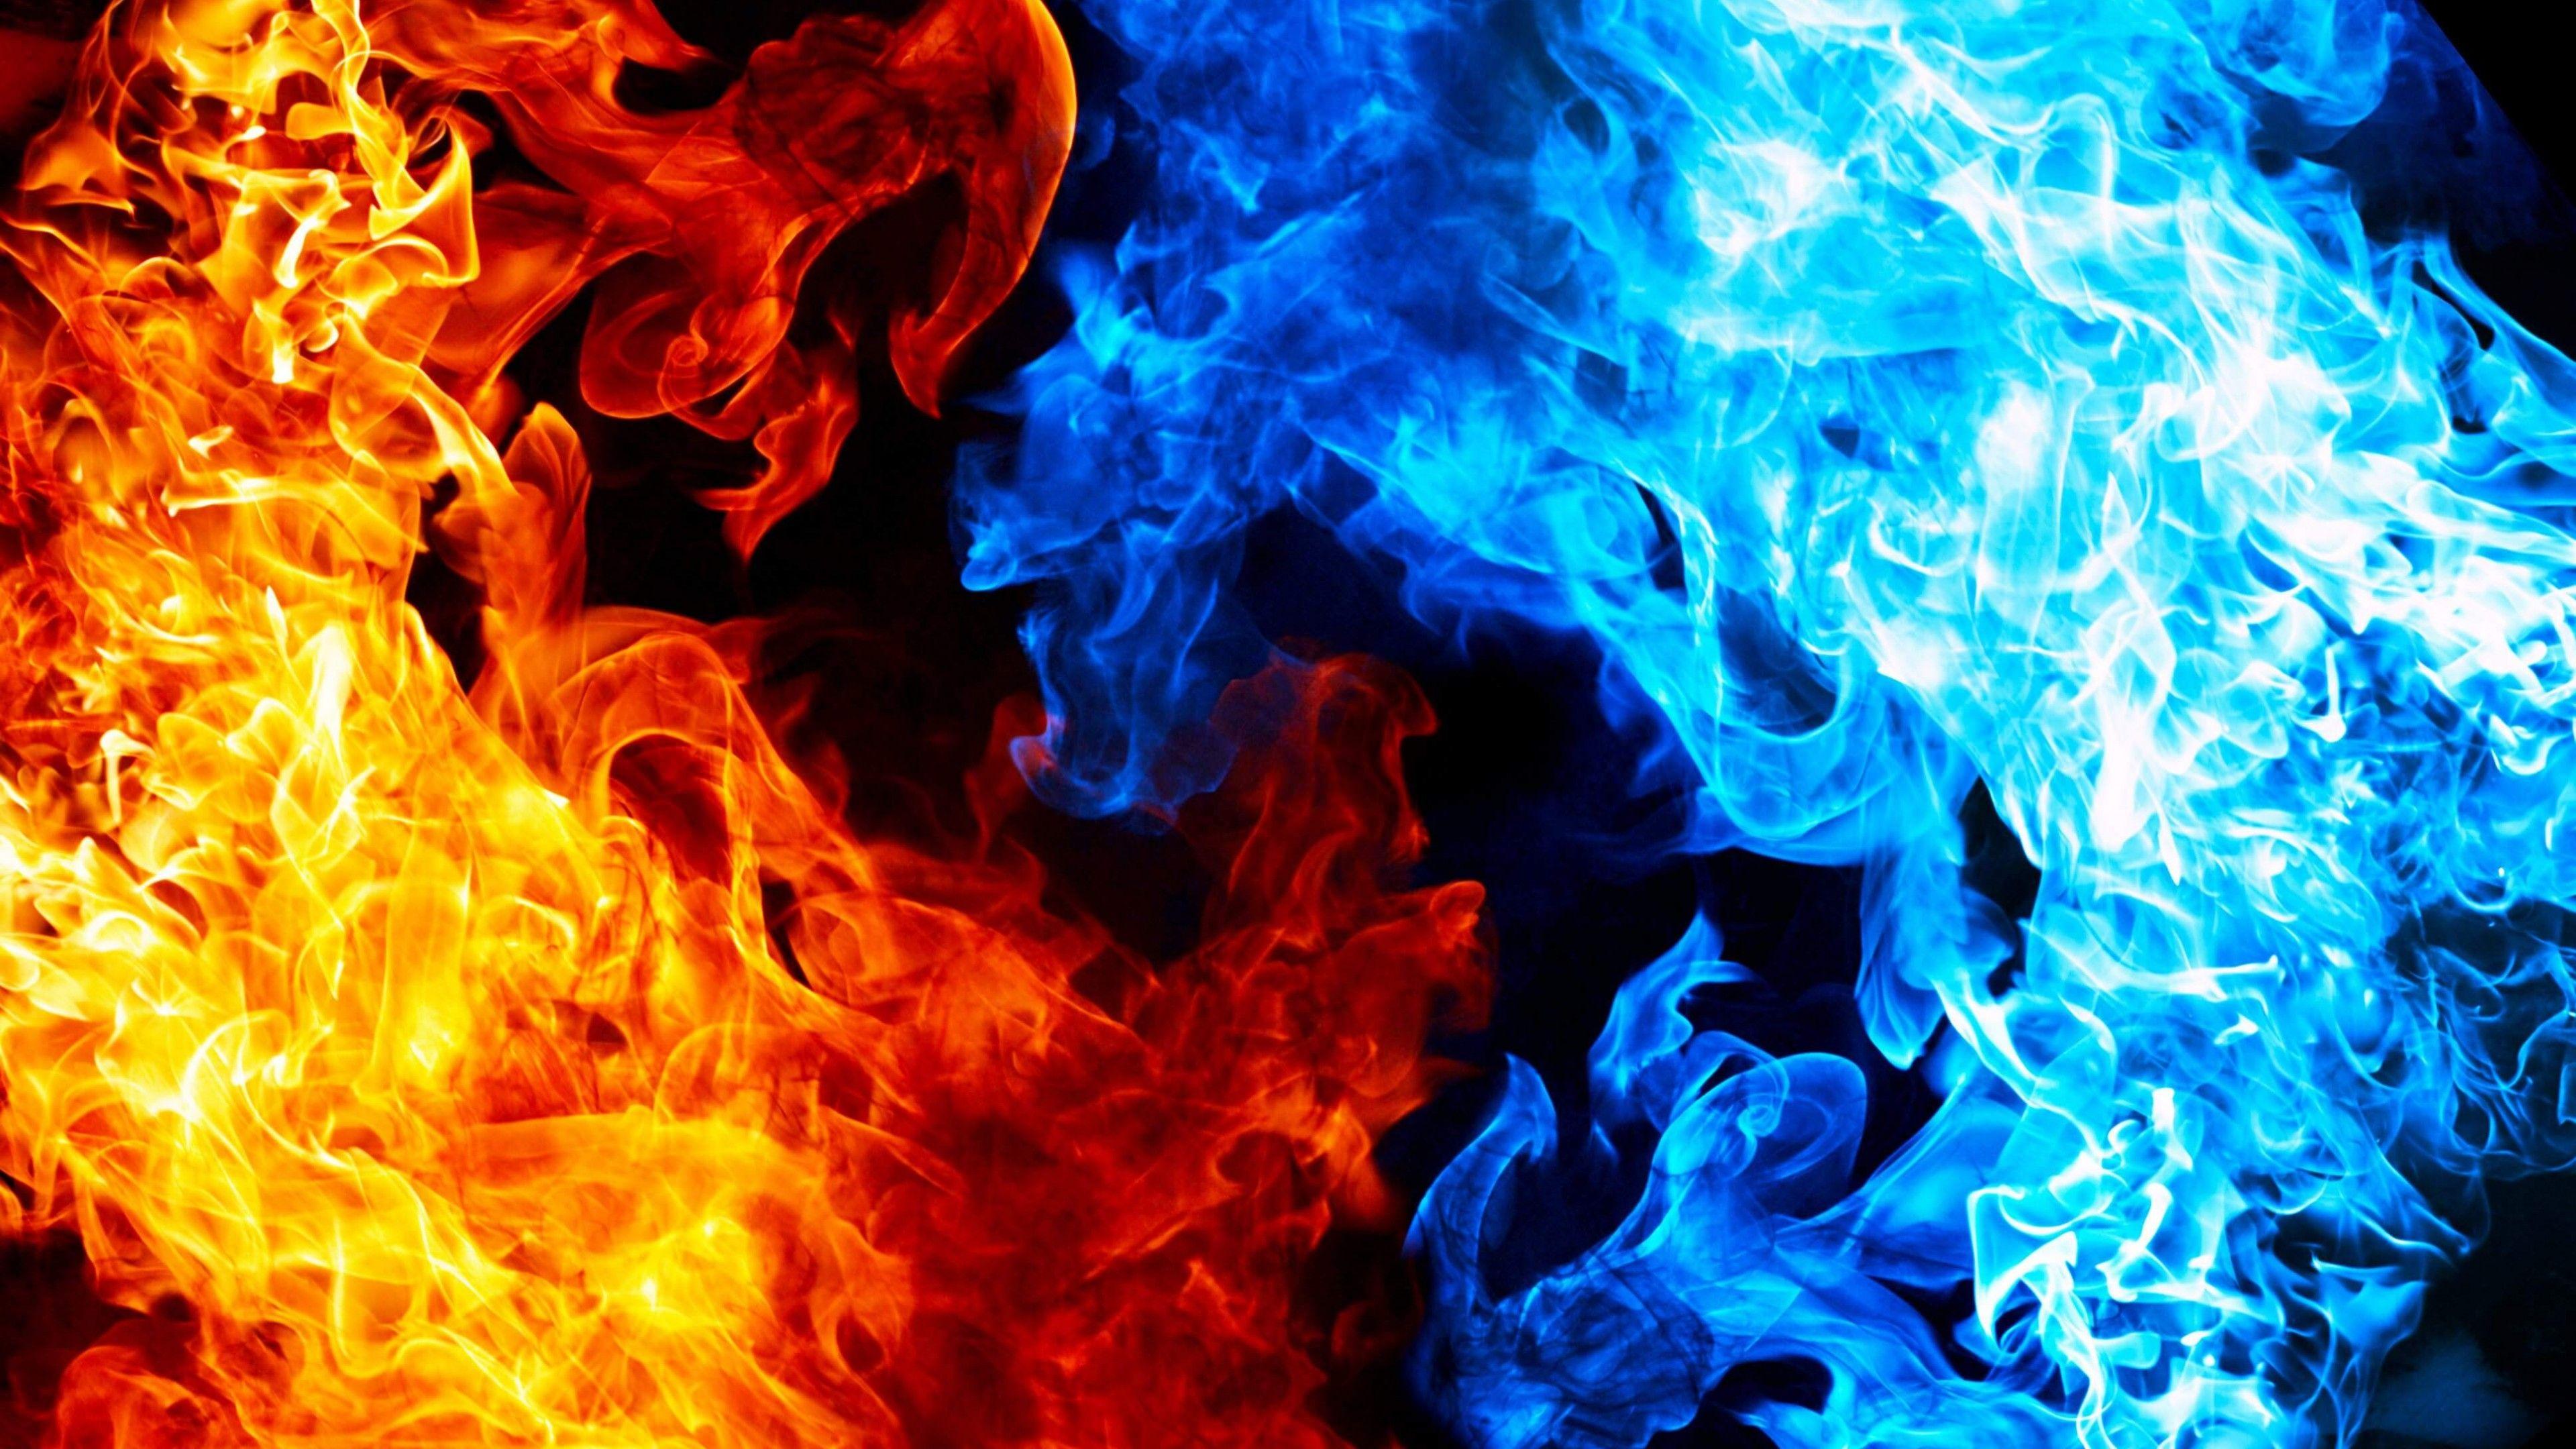 Blue and Red Fire Wallpaper HD, Abstract Wallpaper, Blue